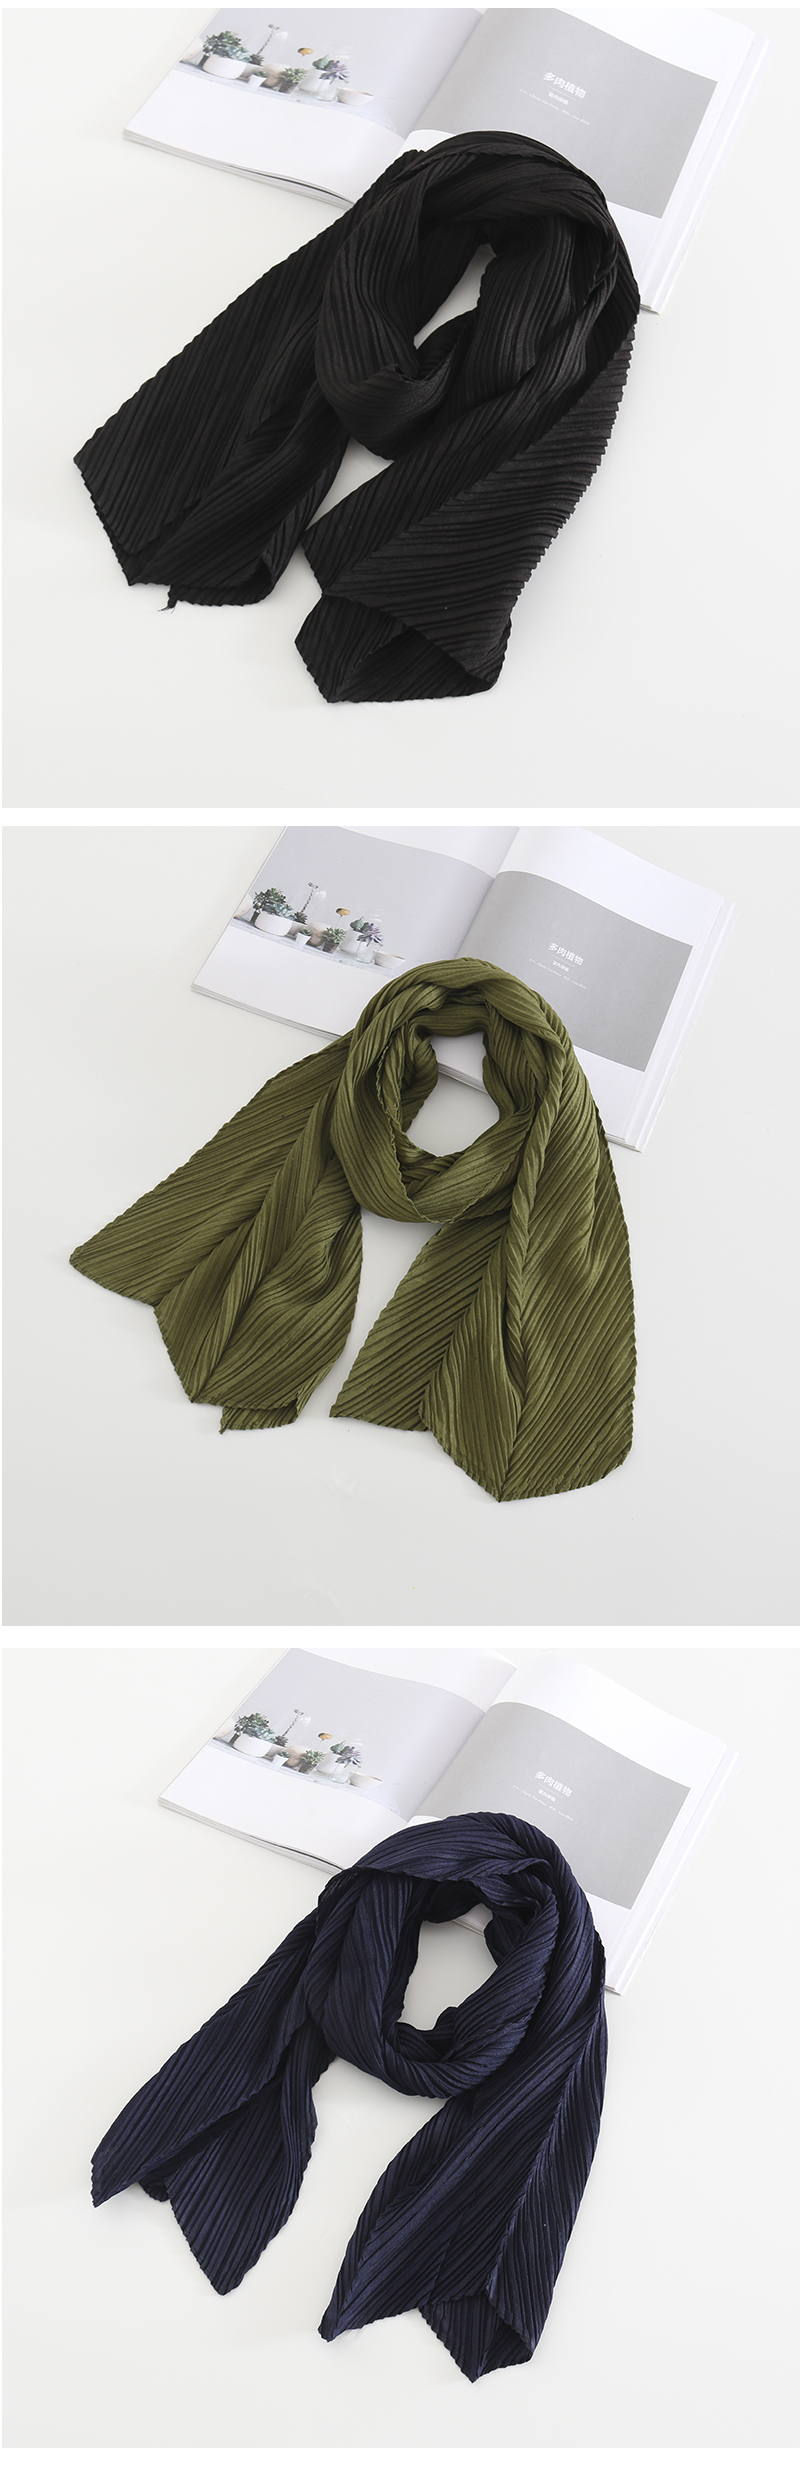 Fashion Pickles Pure Color Crumpled Silk Scarf,Thin Scaves